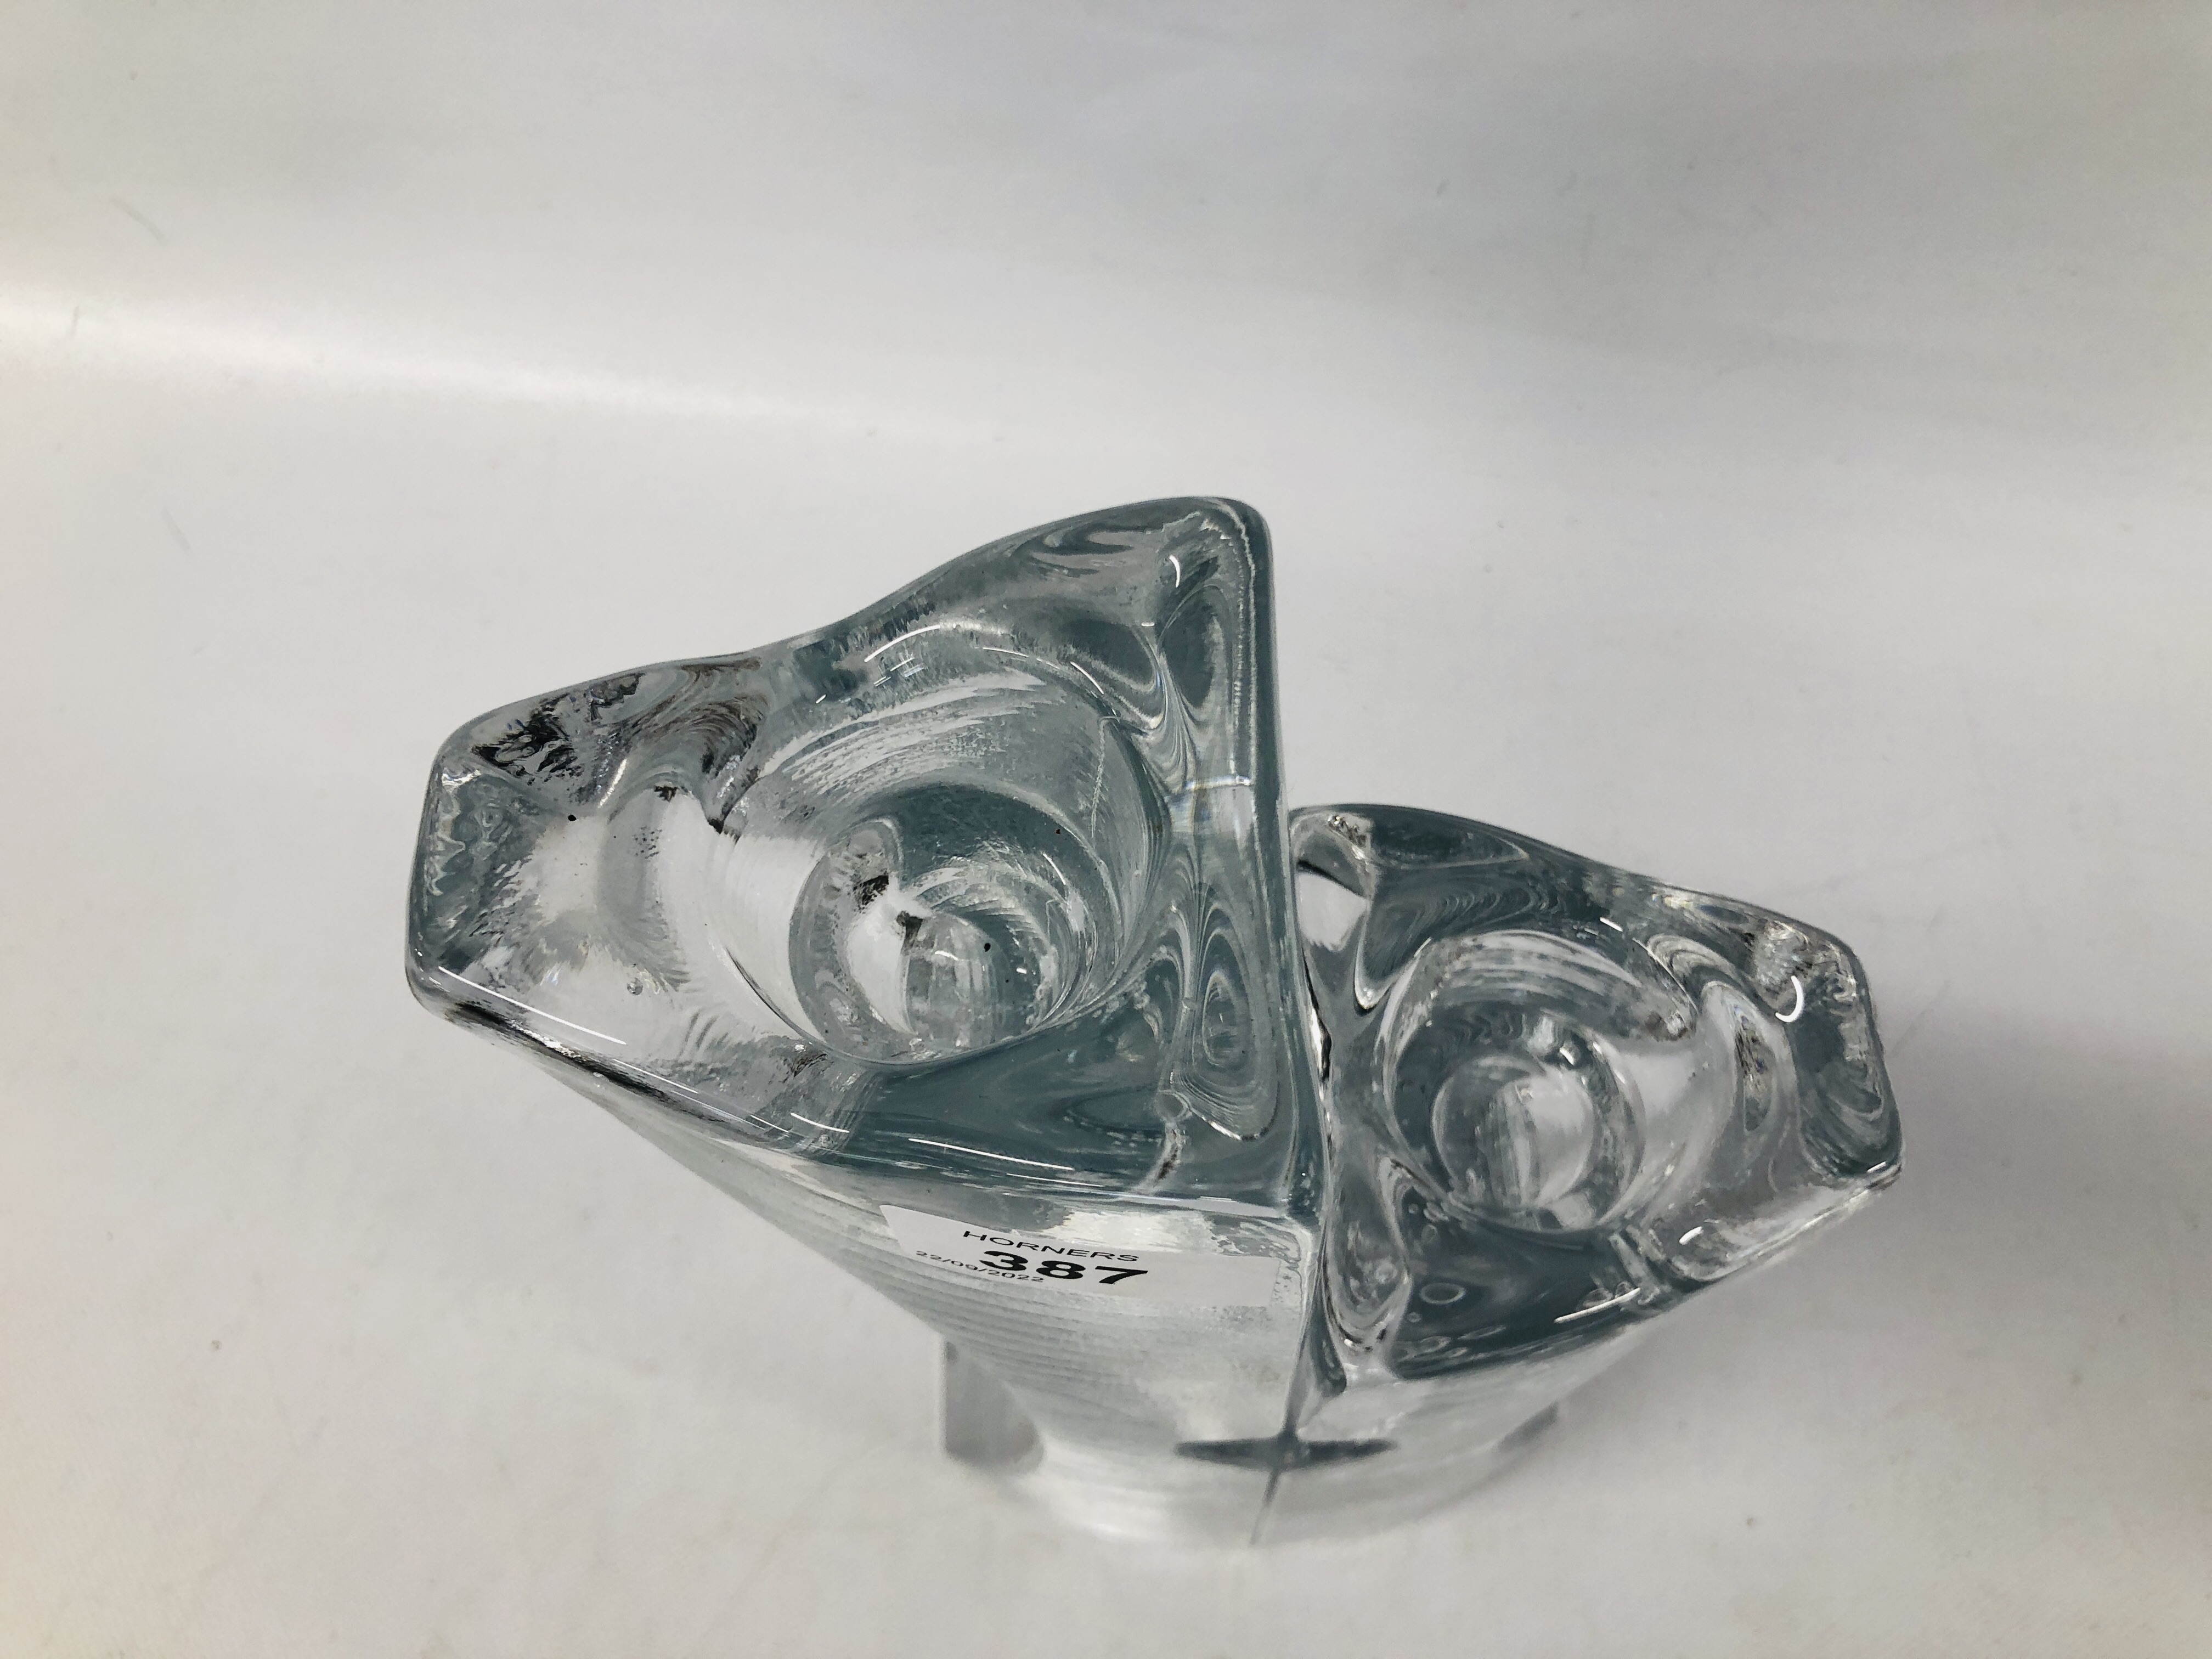 A KIELL ENTMAN "HEARTS ENTWINED" GLASS TEALIGHT SCULPTURE HEIGHT 30CM. - Image 2 of 6